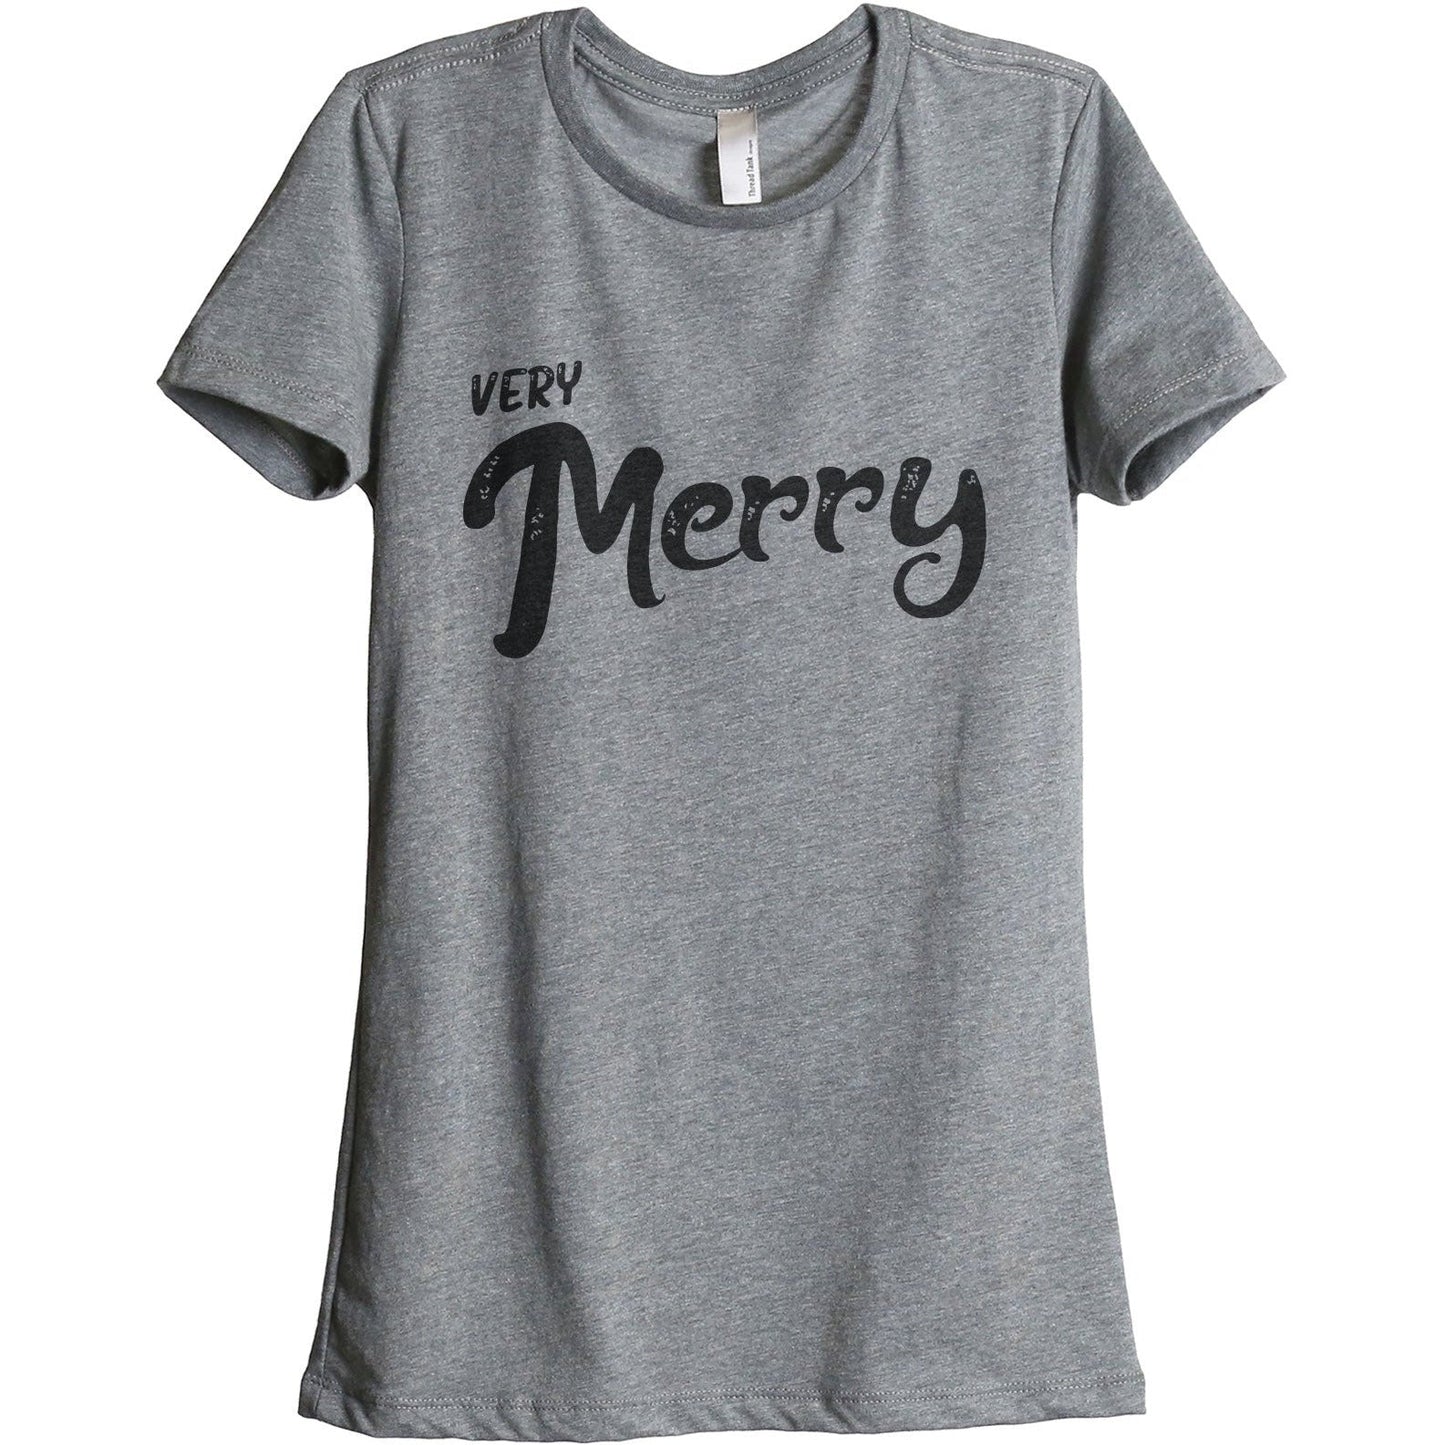 Very Merry - Stories You Can Wear